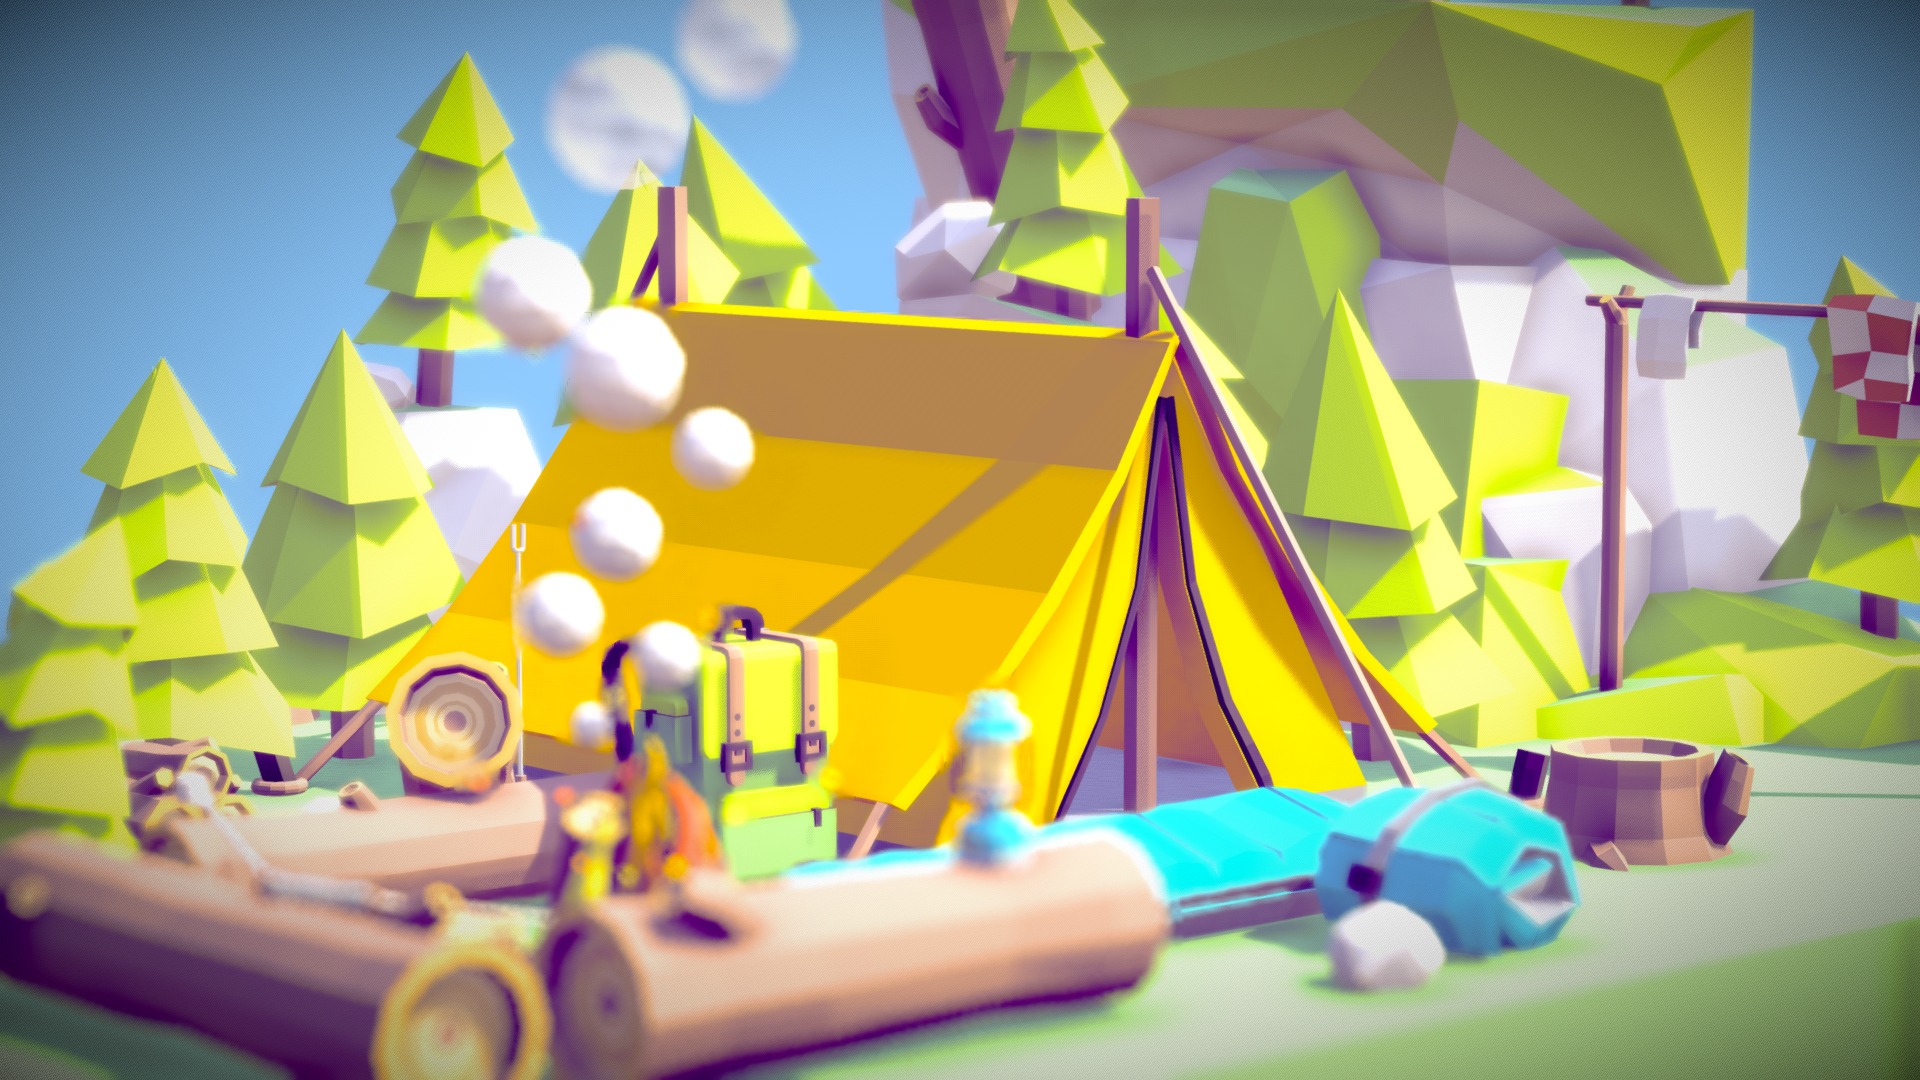 A low poly camping asset collection made in VR in Blocks.  Feel free to download and use in your projects!  :)

Follow:
https://www.instagram.com/newpxl/
https://twitter.com/alexsafayan - Low Poly Camping Assets Collection - 3D model by Alex Safayan (@alexsafayan) 3d model